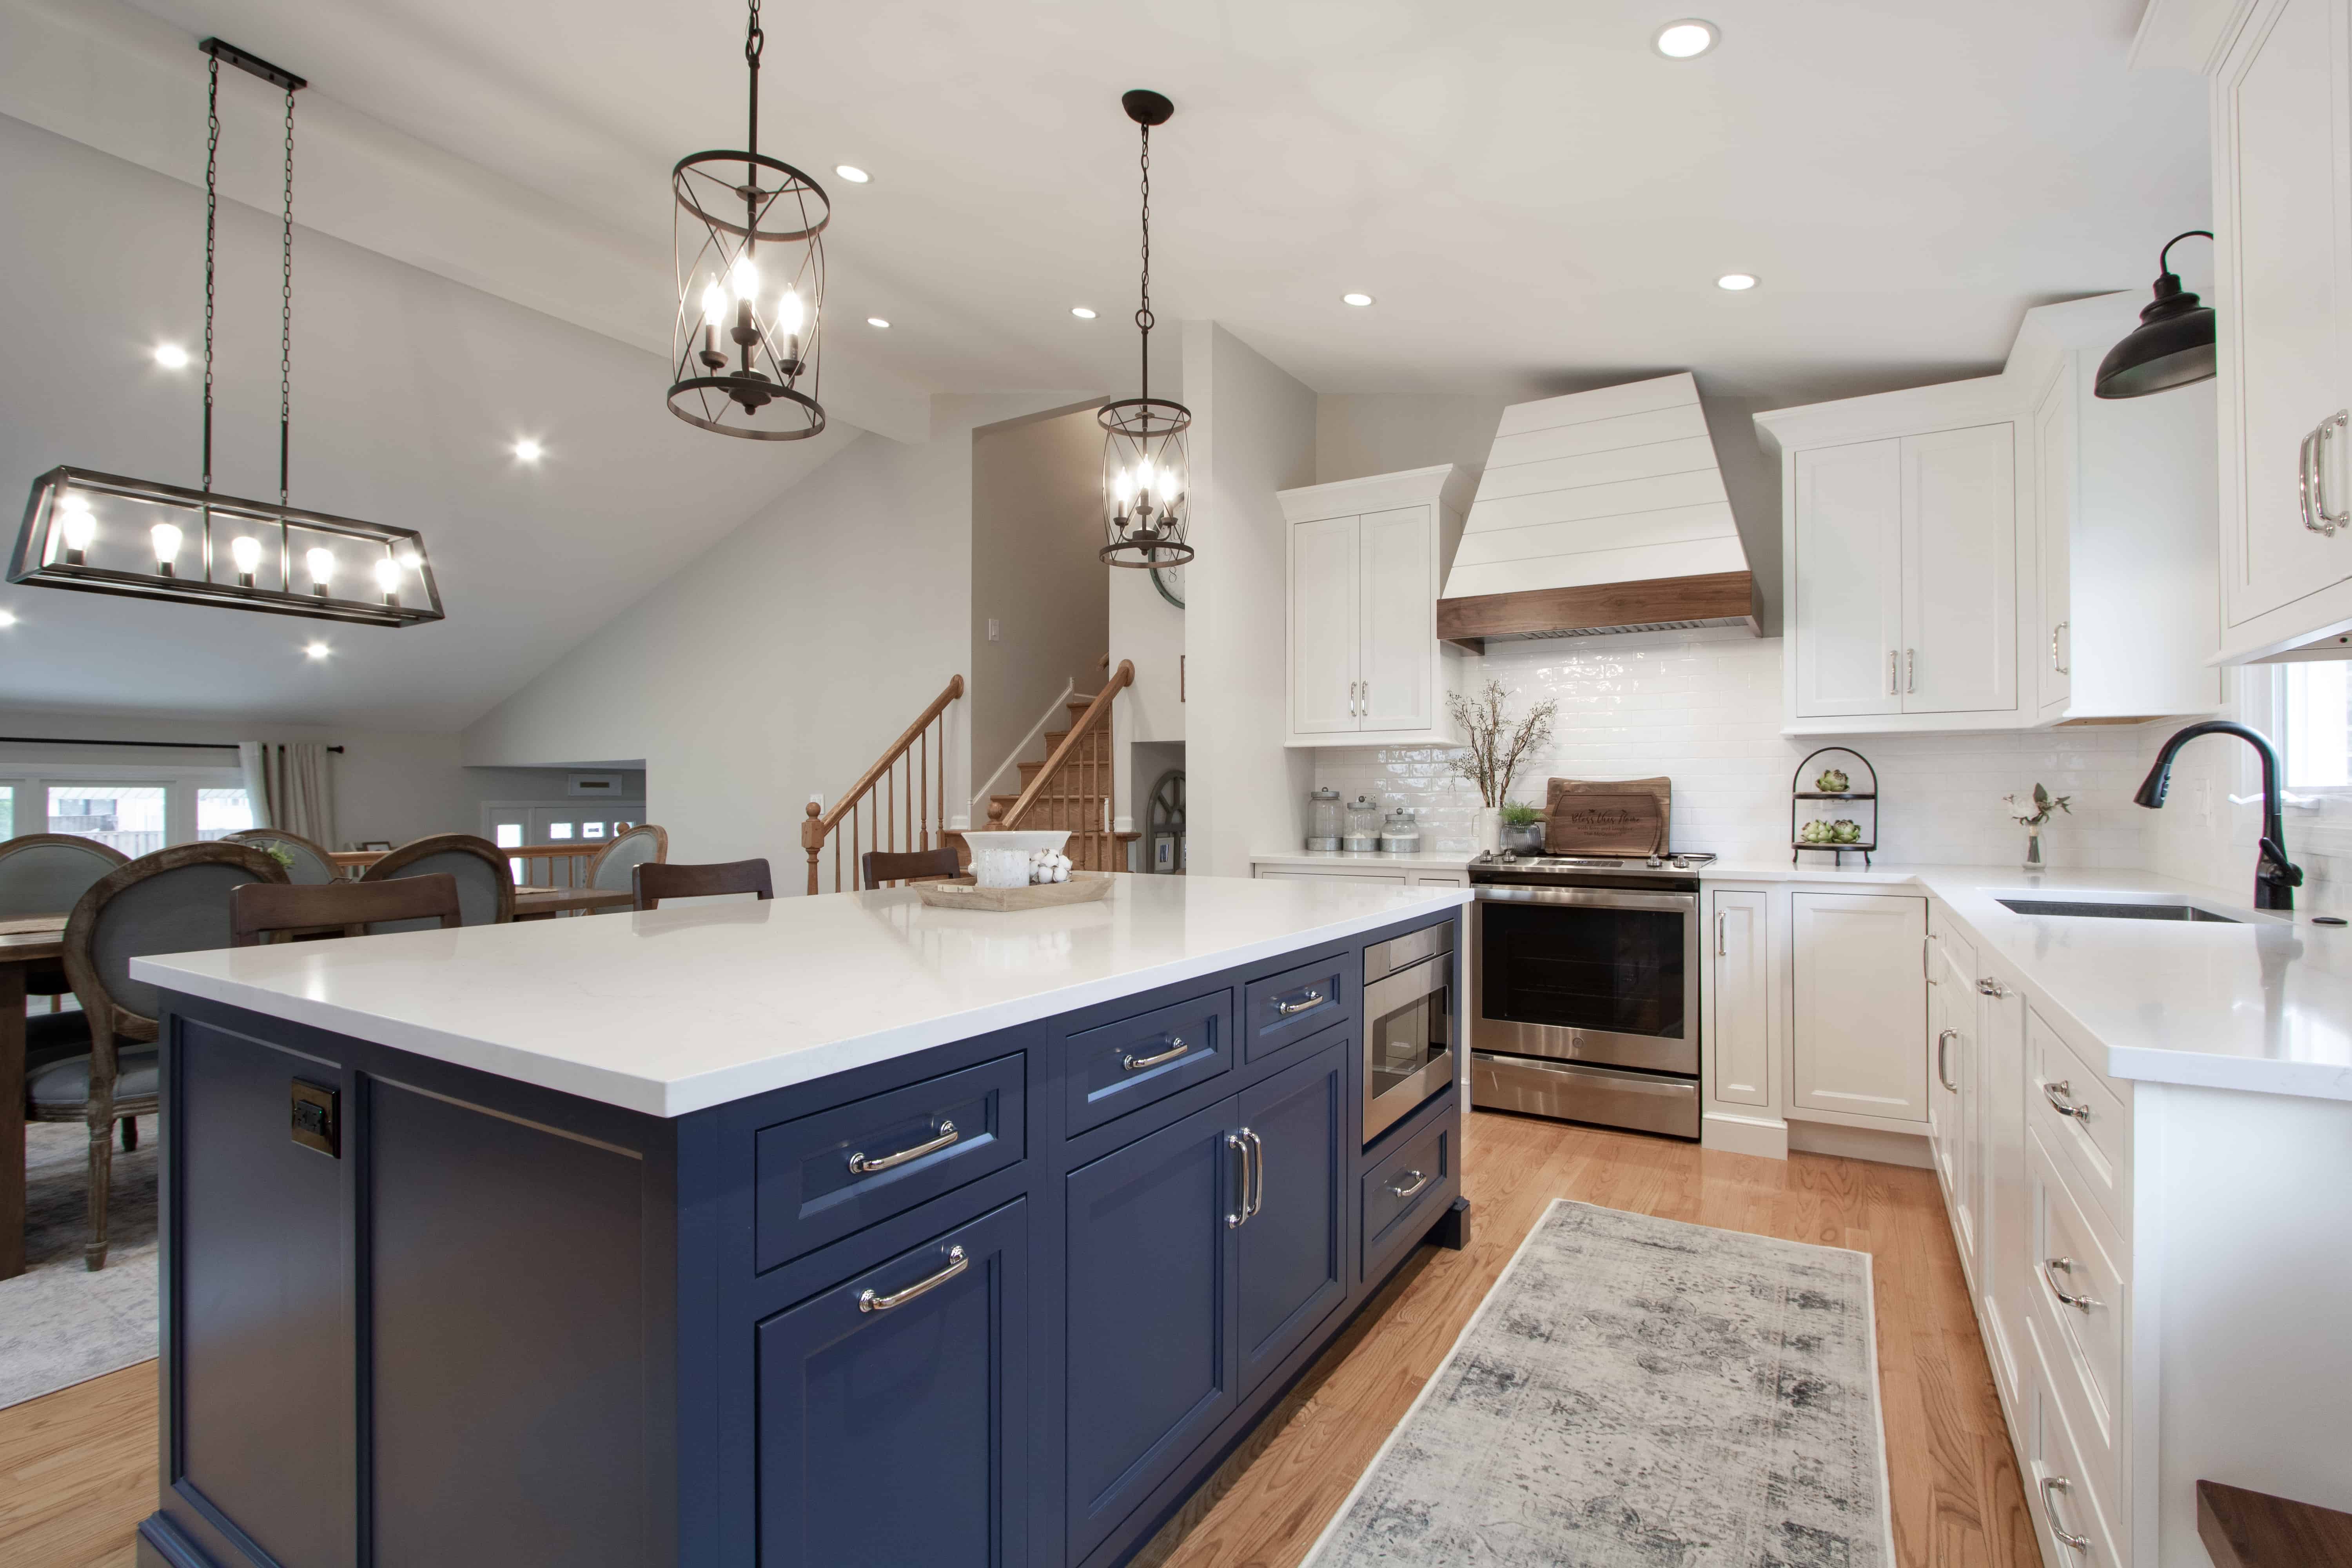 Kitchen Remodeling Project located in Barrington, Illinois